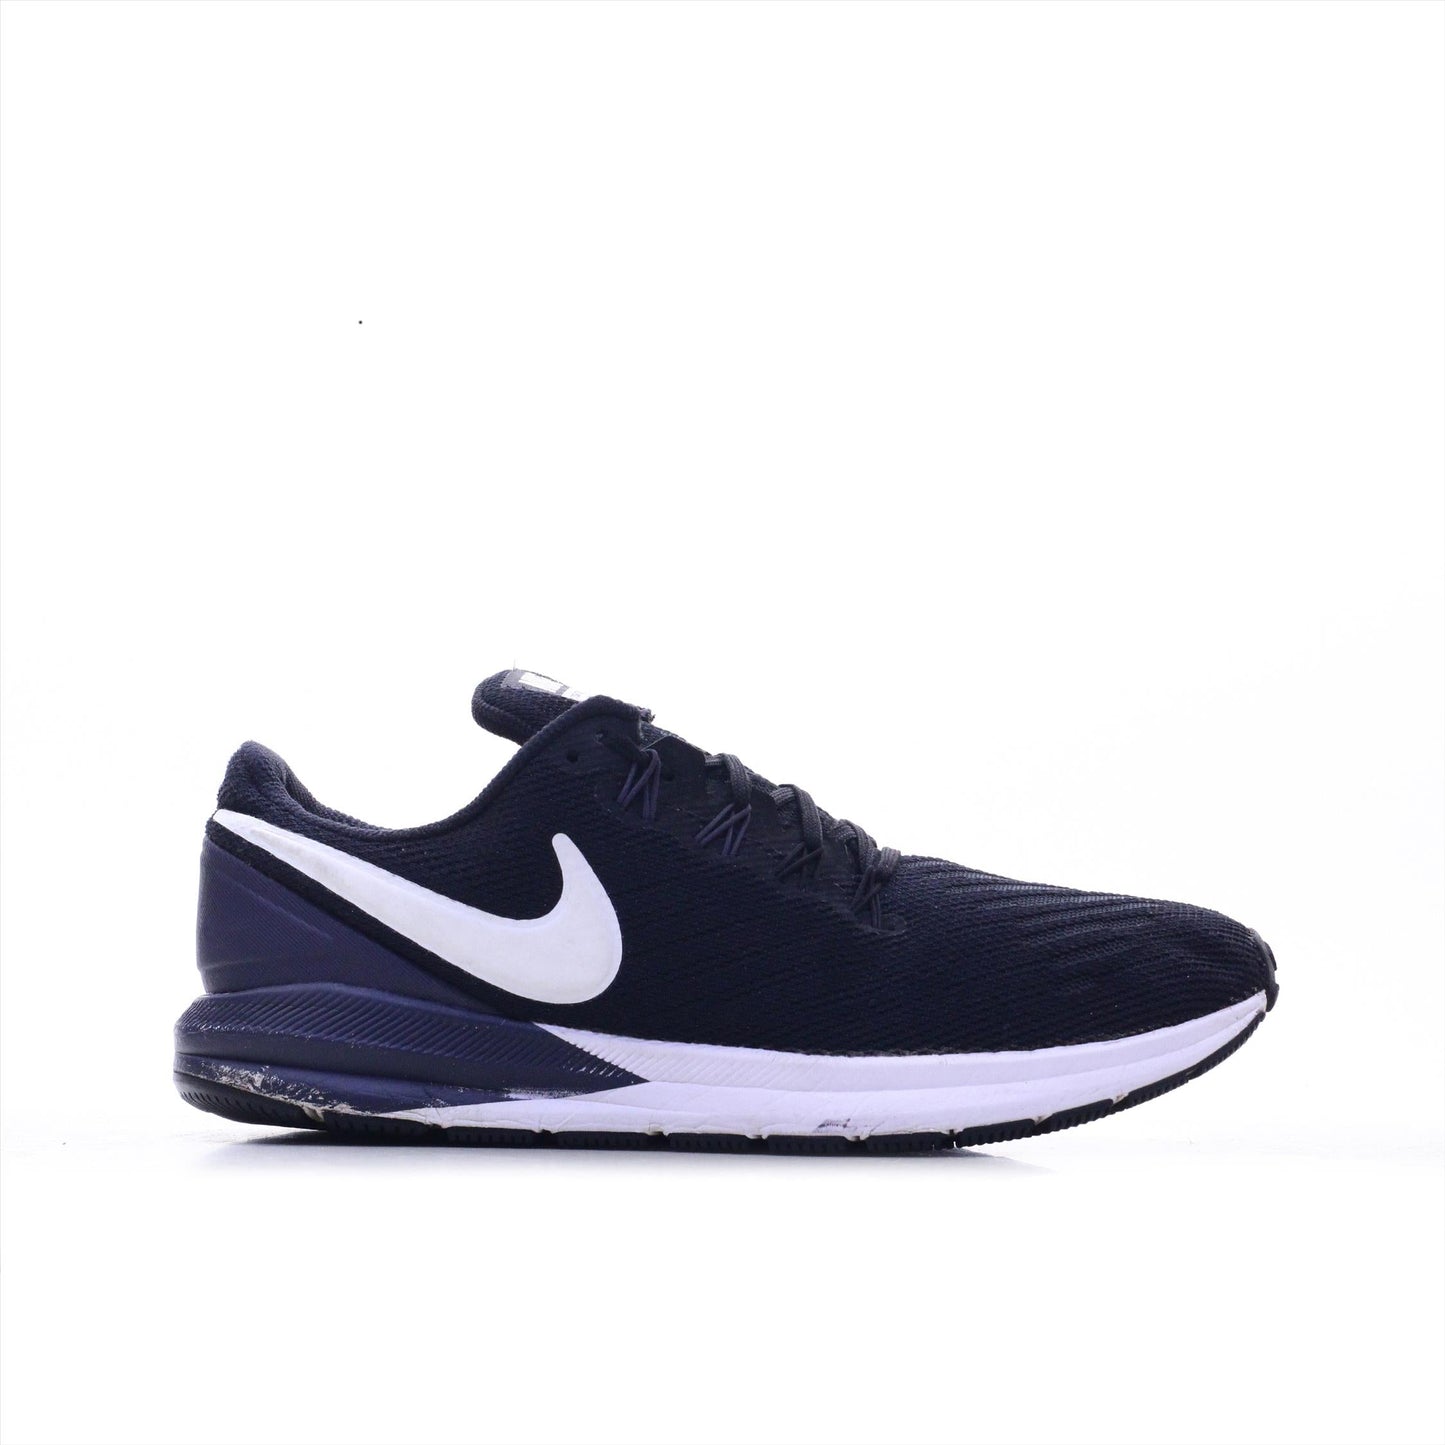 NIKE ZOOM STRUCTURE 22 (Original USA Imported)